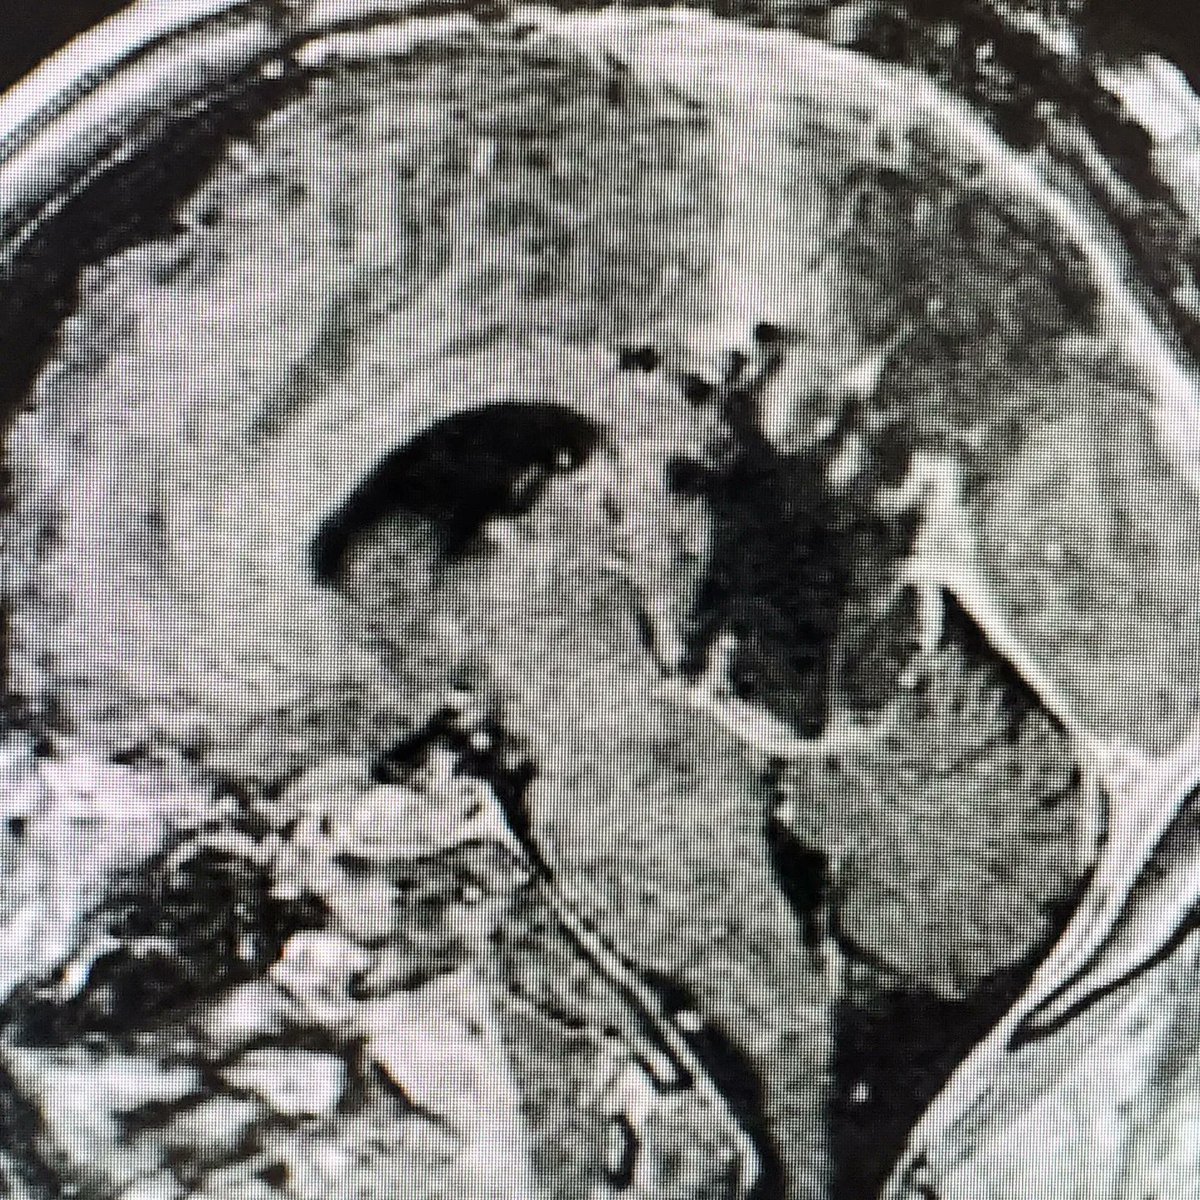 Renee Descartes thought that the pineal gland was the 'seat of the soul'. One of the great privileges of being a #NeuroSurgeon is the ability to approach the seat of the soul to remove this #meningioma. It is truly an honor to be able to operate and serve! #litbrain @PennNSG